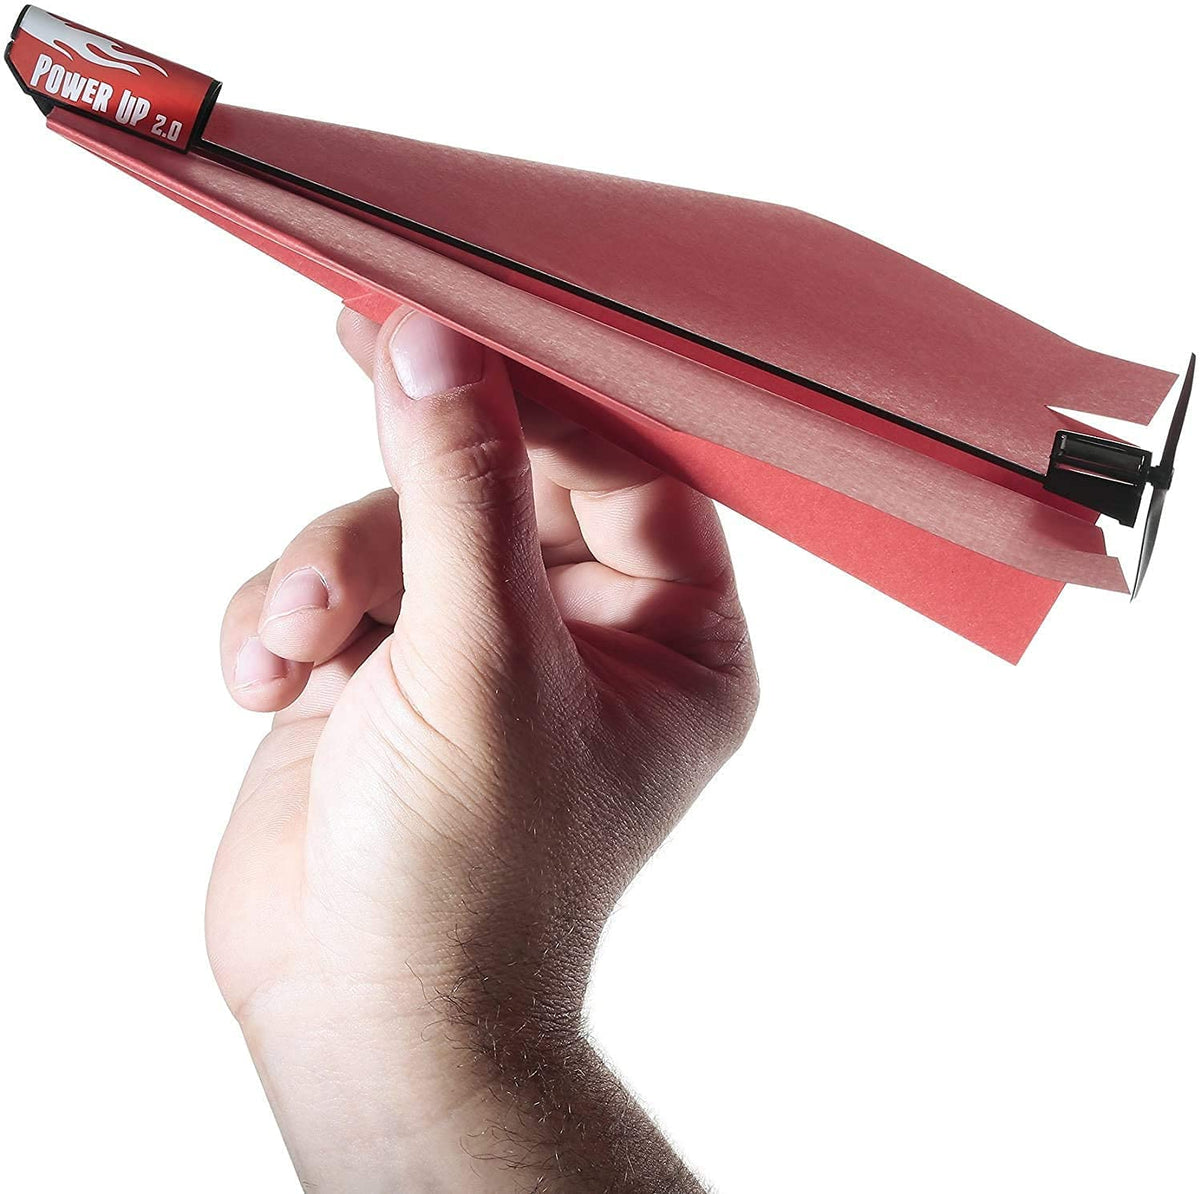 PowerUp 2.0 Electric Paper Airplane Conversion Kit | PowerUp - Wake Concept Store  